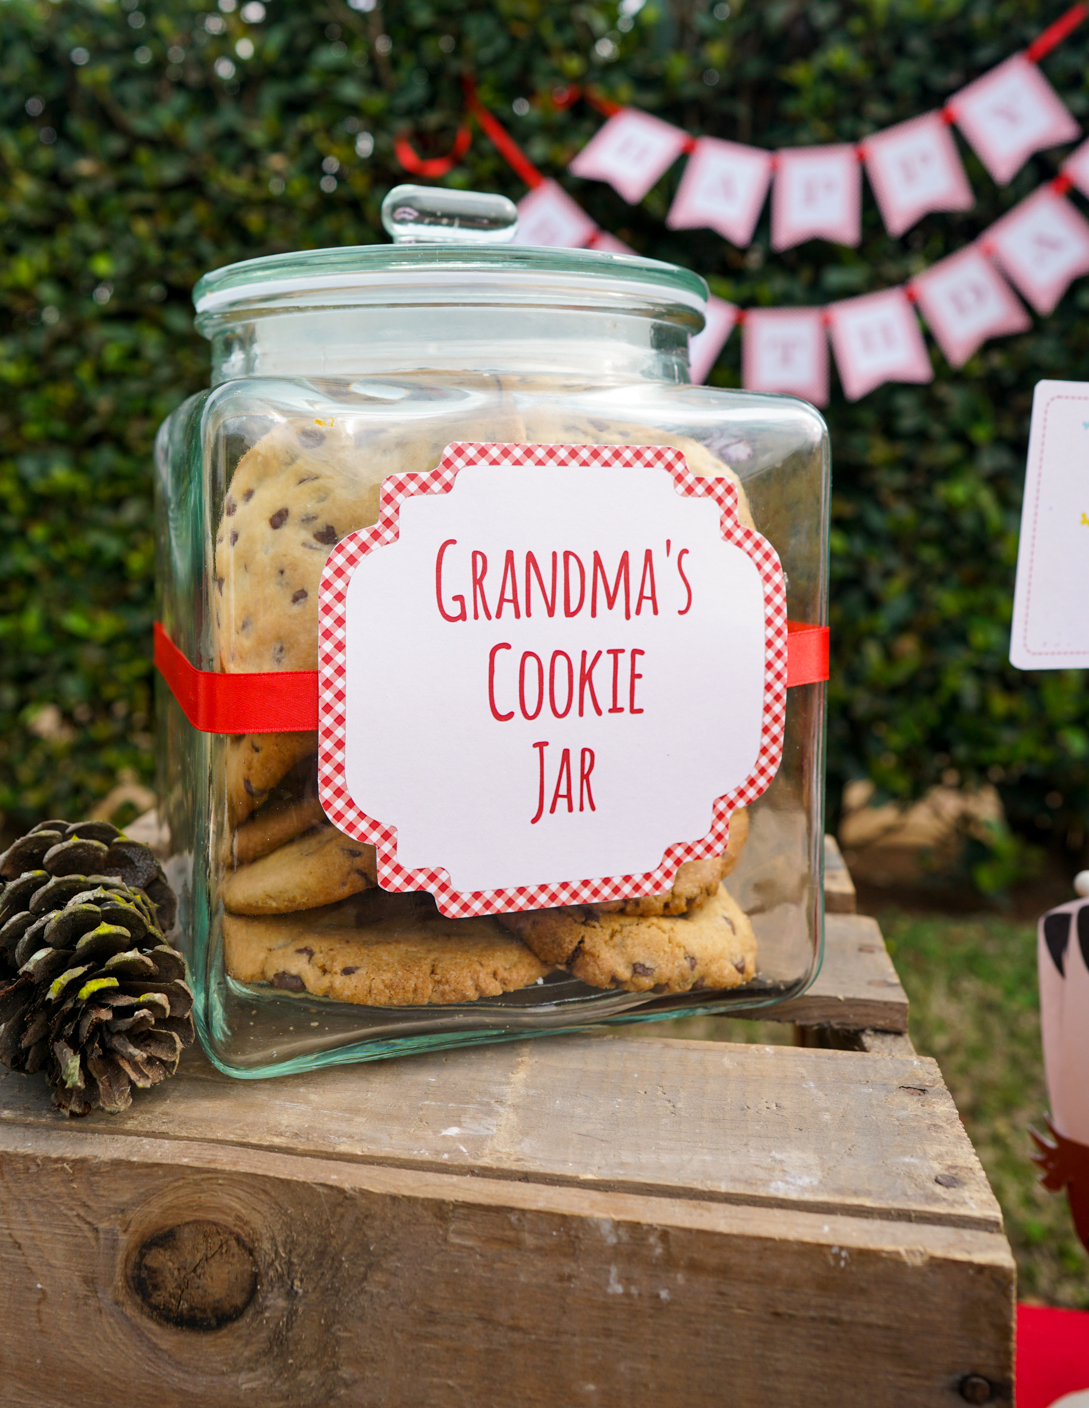 Red Riding Hood Party Food Label on our big glass cookie jar that is filled with giant chocolate chip cookies